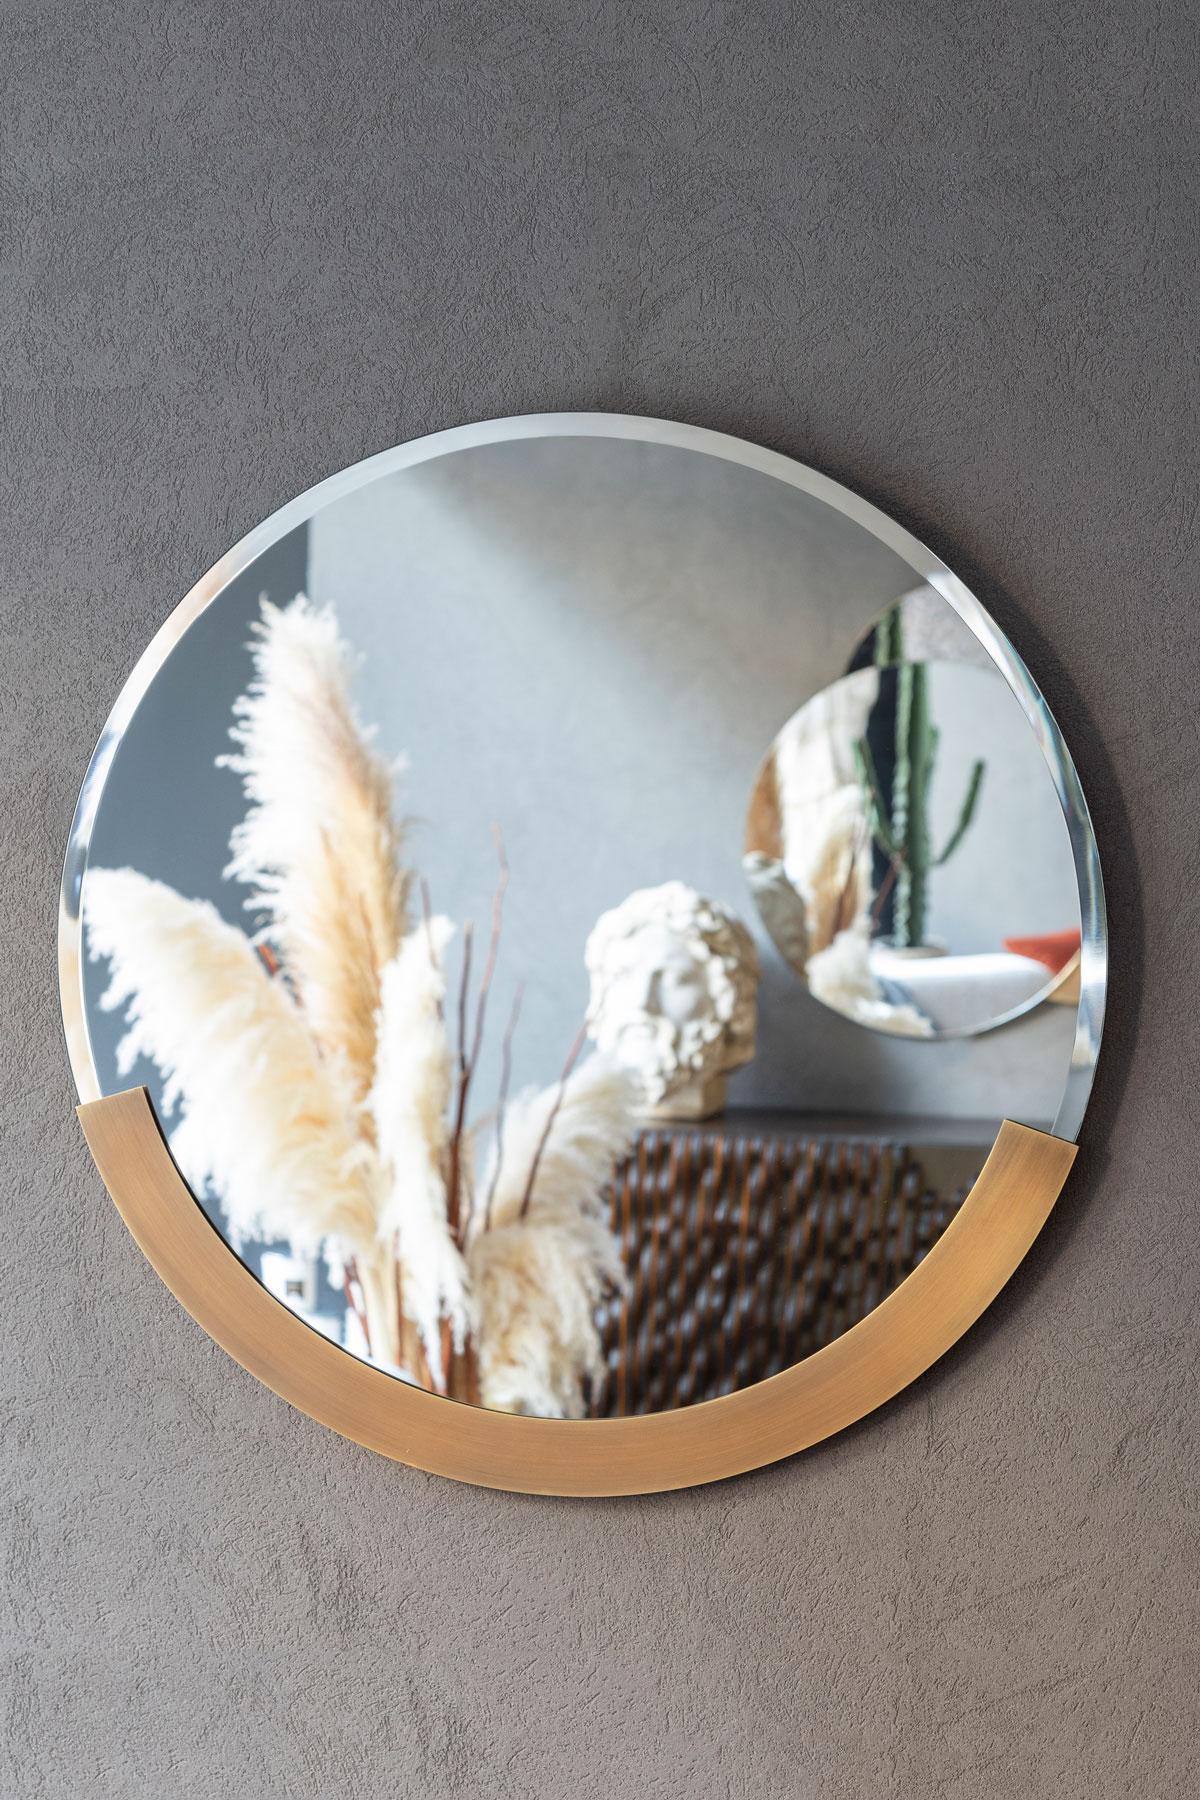 Daisy mirror that reflects you in its simplest form.

*Customizable
*Brass/Matt Chrome/ Different colors painted metal.